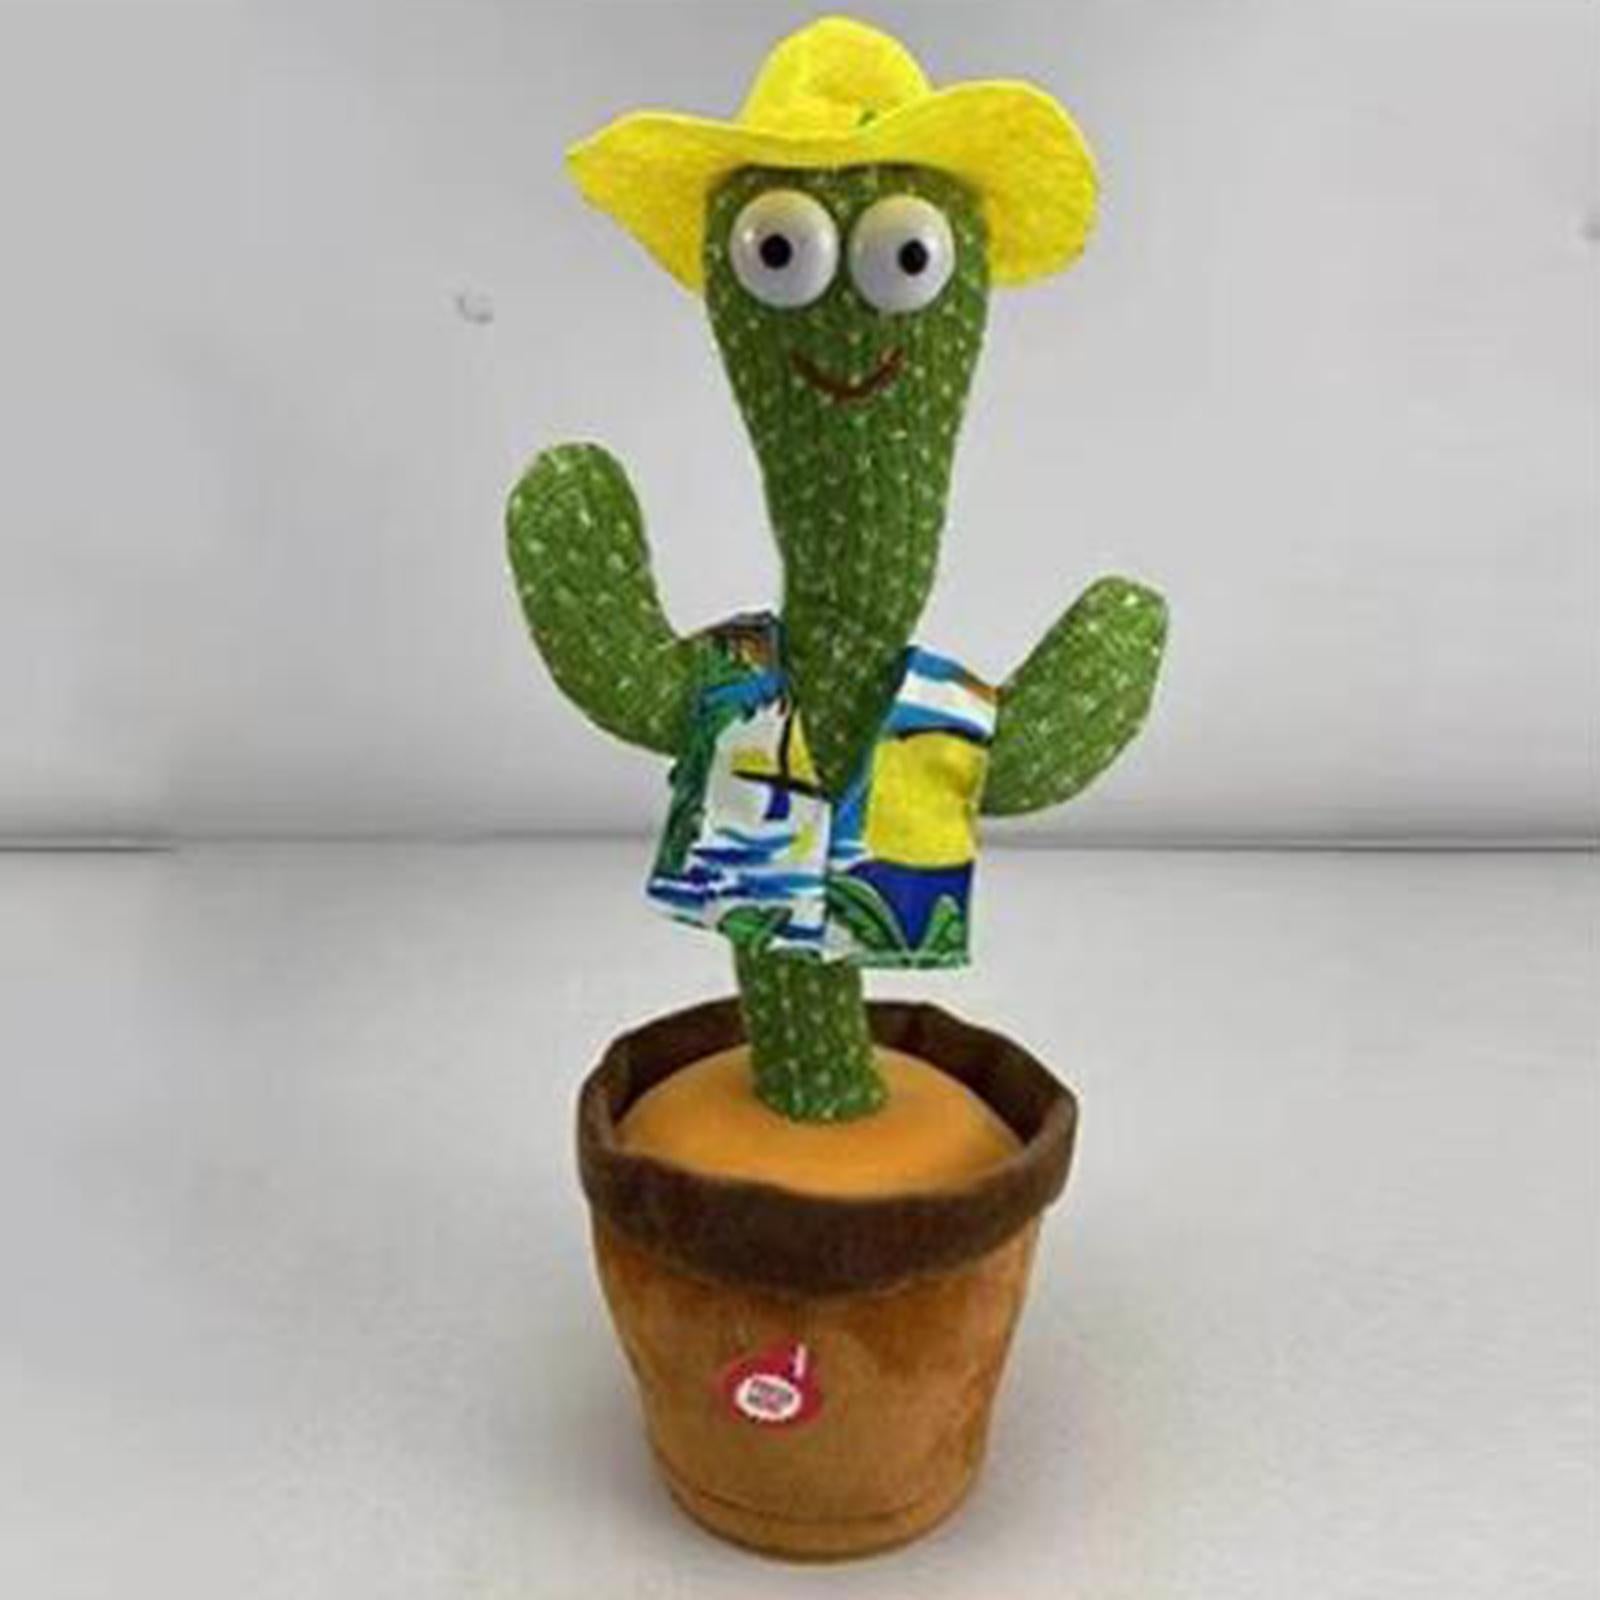 Funny Potted Dancing Cactus Plush Toy Swing Home Tabletop Decor Party Favors Hawaii 120 Songs